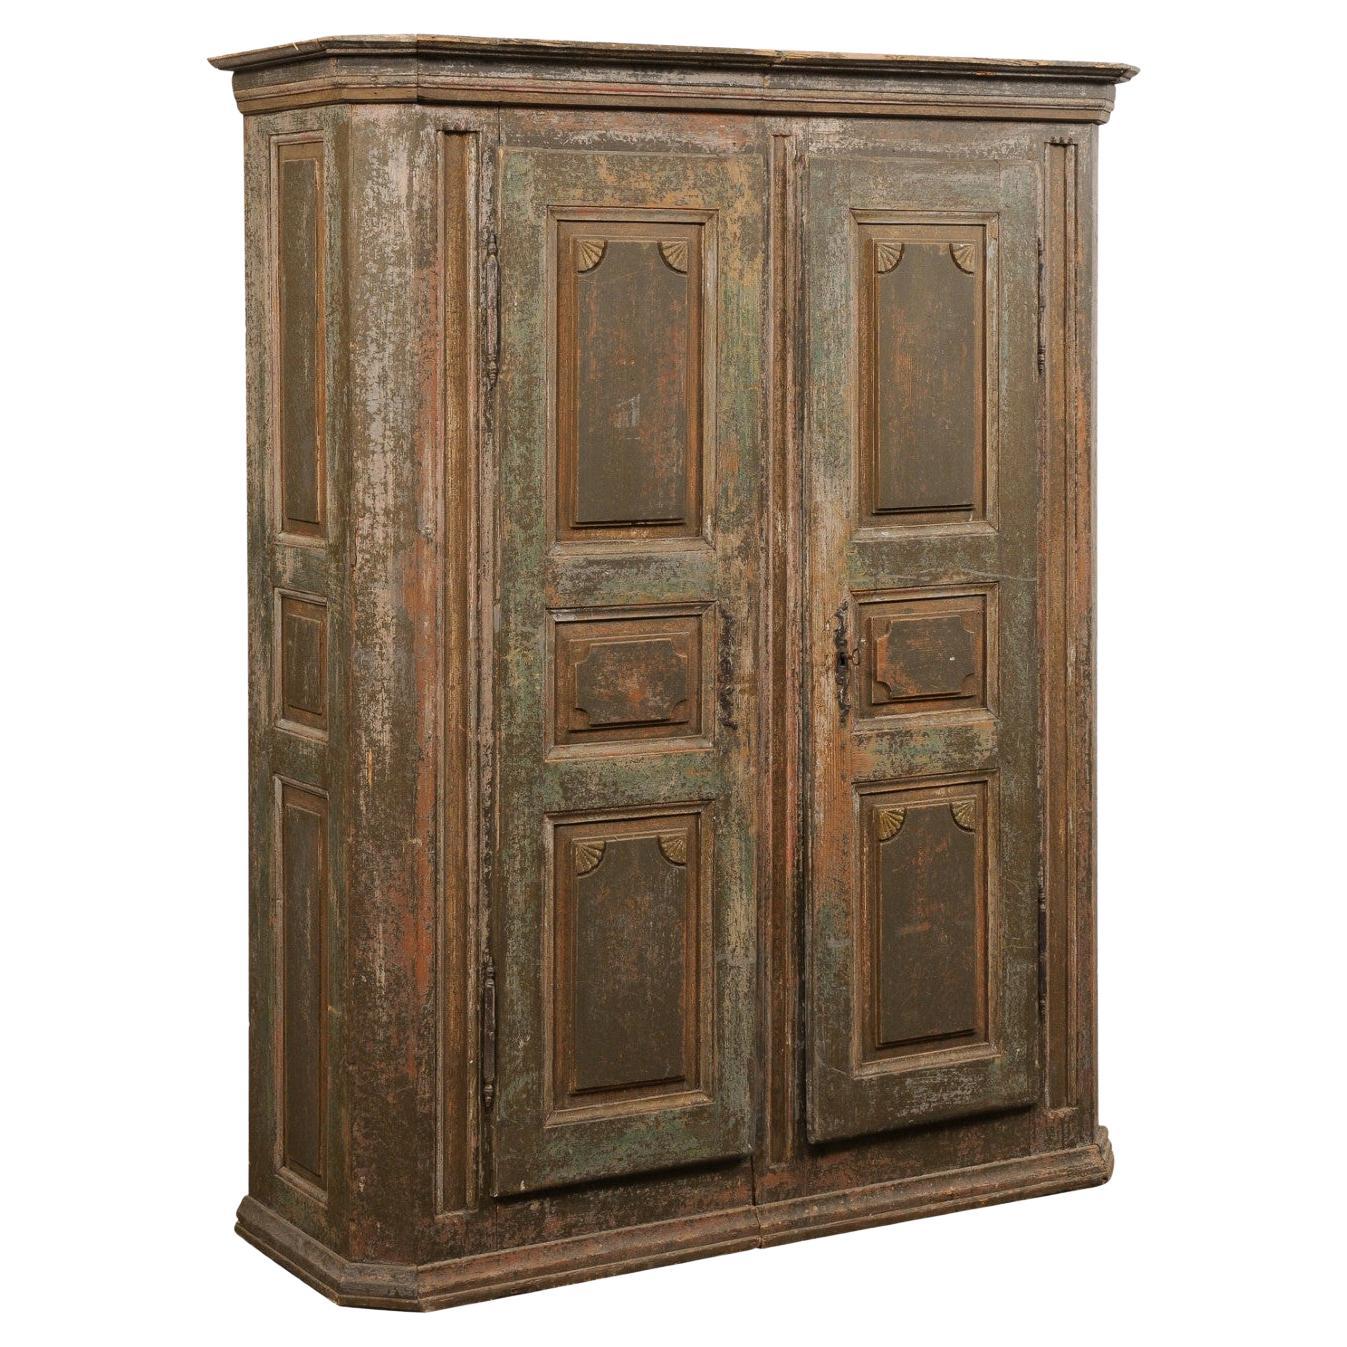 French 19th C. Armoire Cabinet w/ It's Original Paint